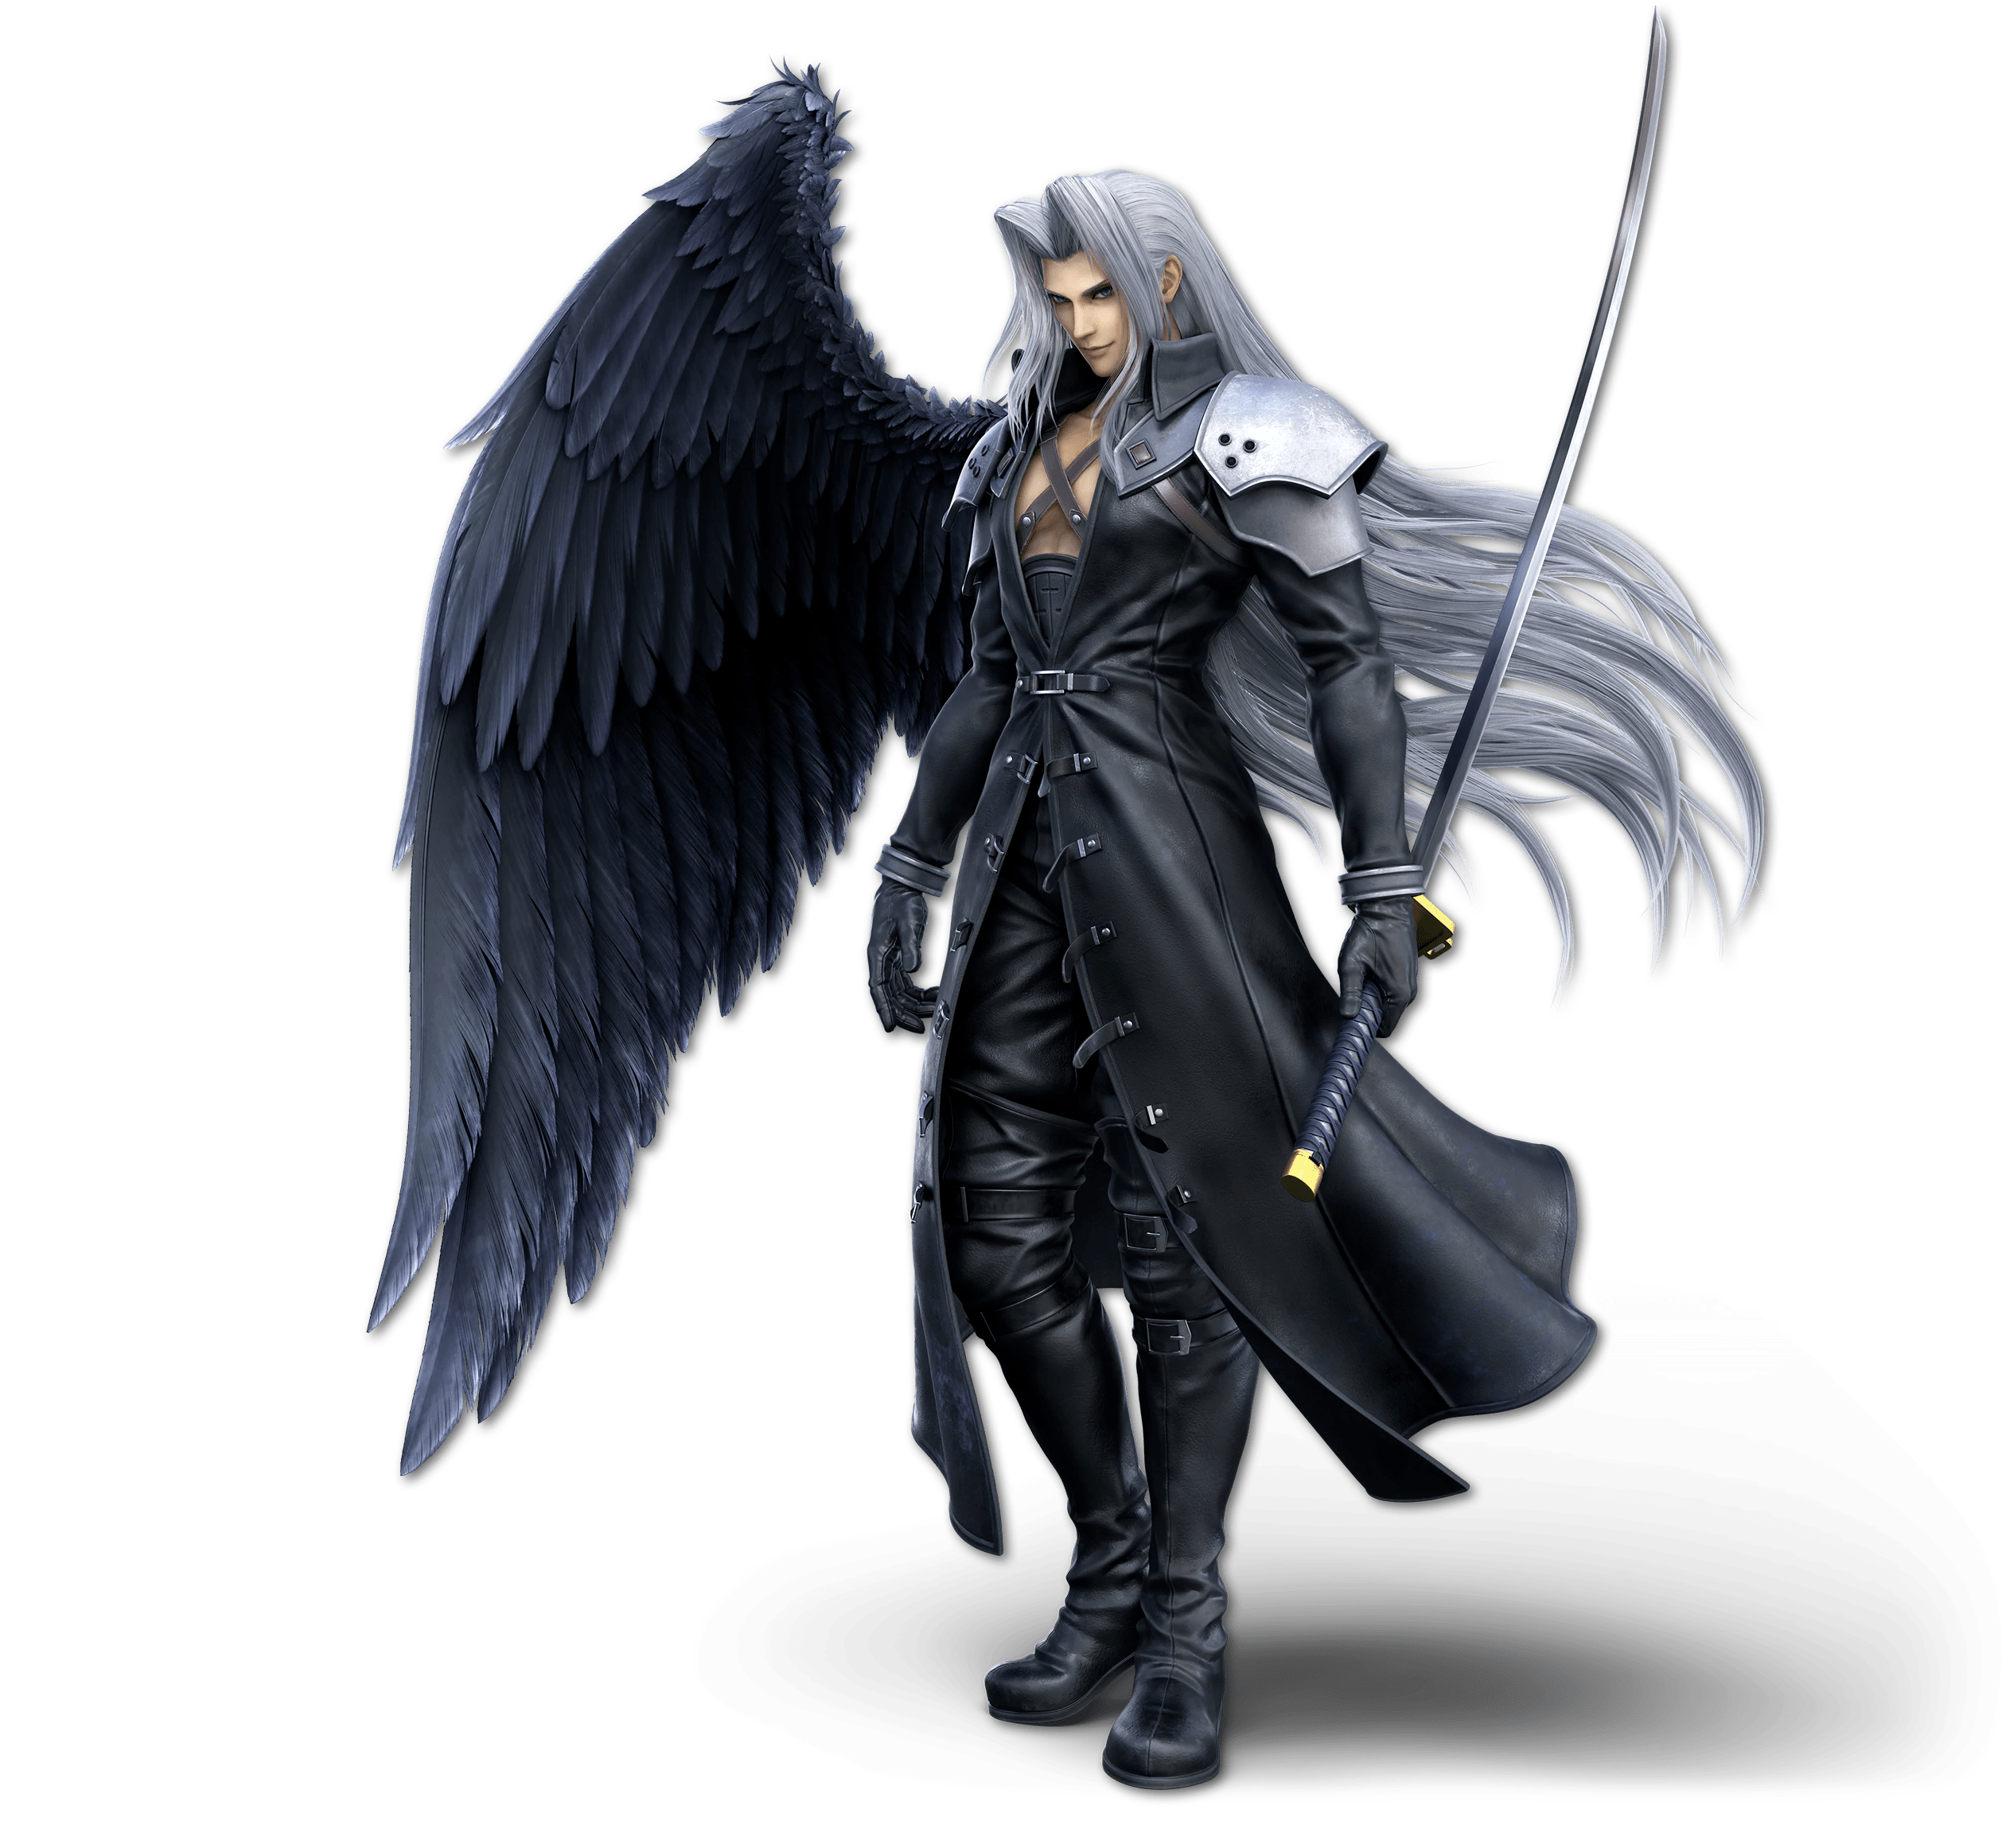 Super Smash Bros. Ultimate Sephiroth. Select this character for for counters, counter tips, and more!